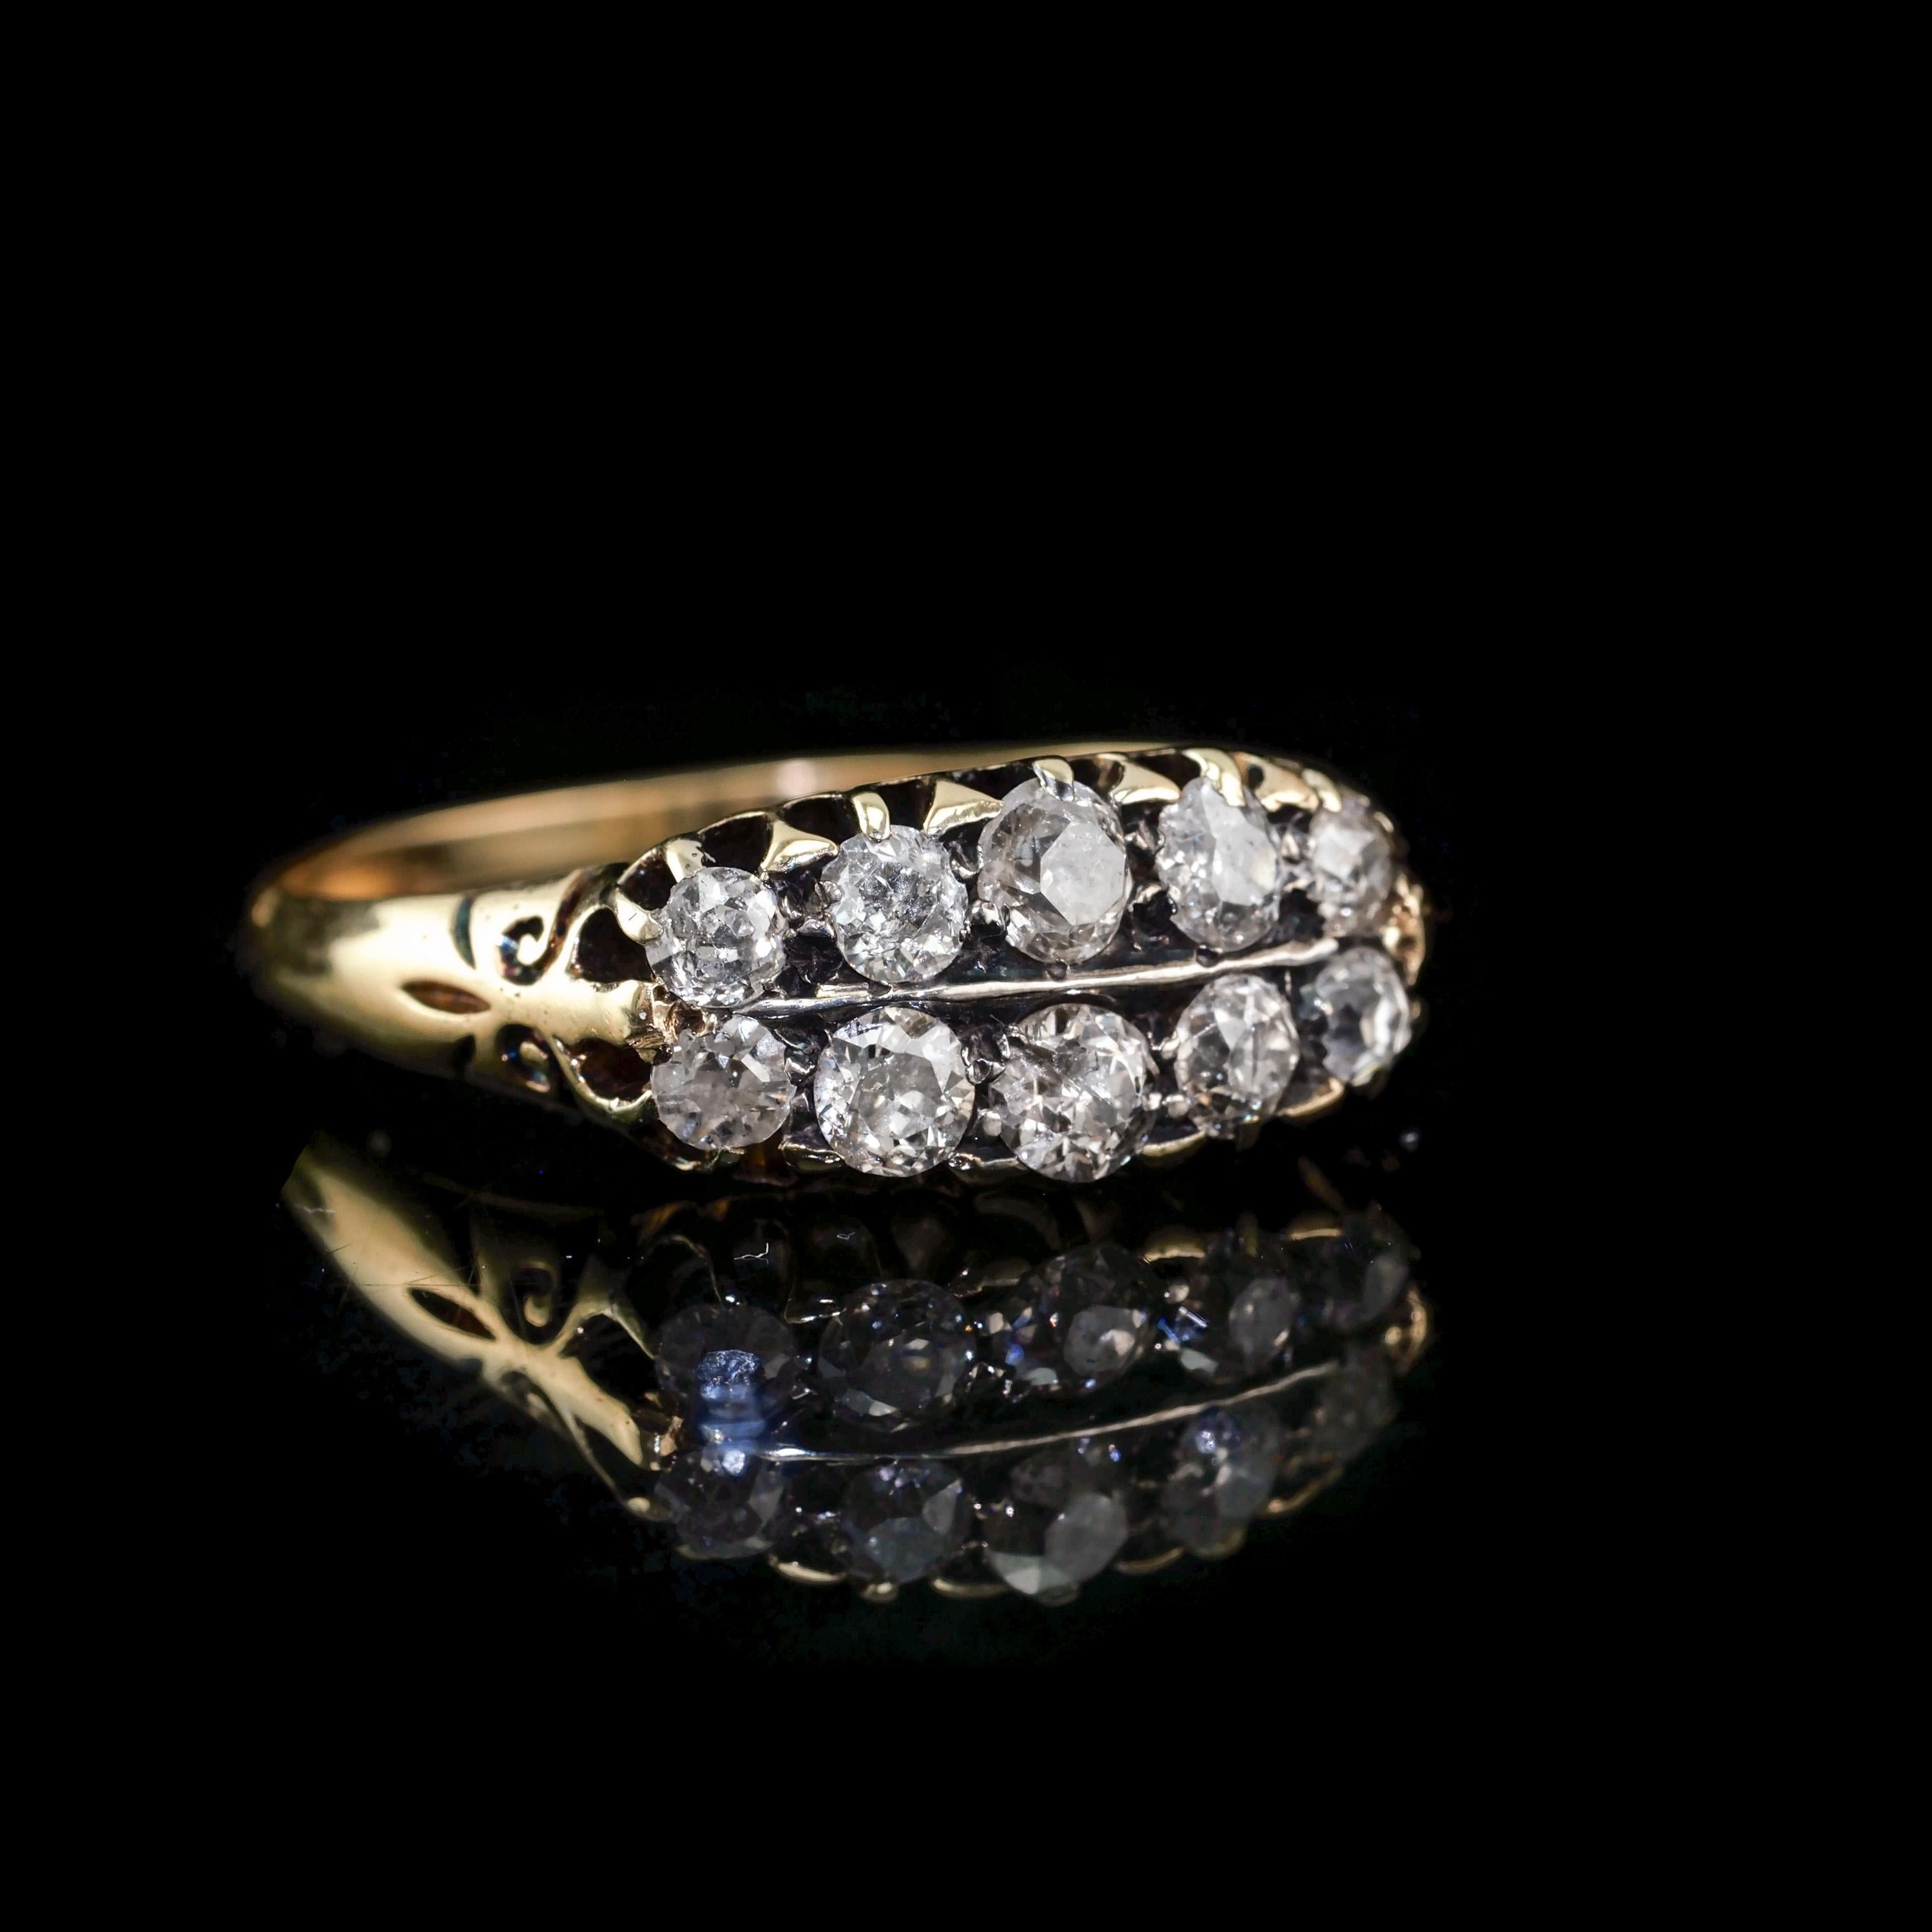 Antique Victorian 18K Gold Diamond Ring Old Cut - Boat Shaped c.1890 For Sale 12